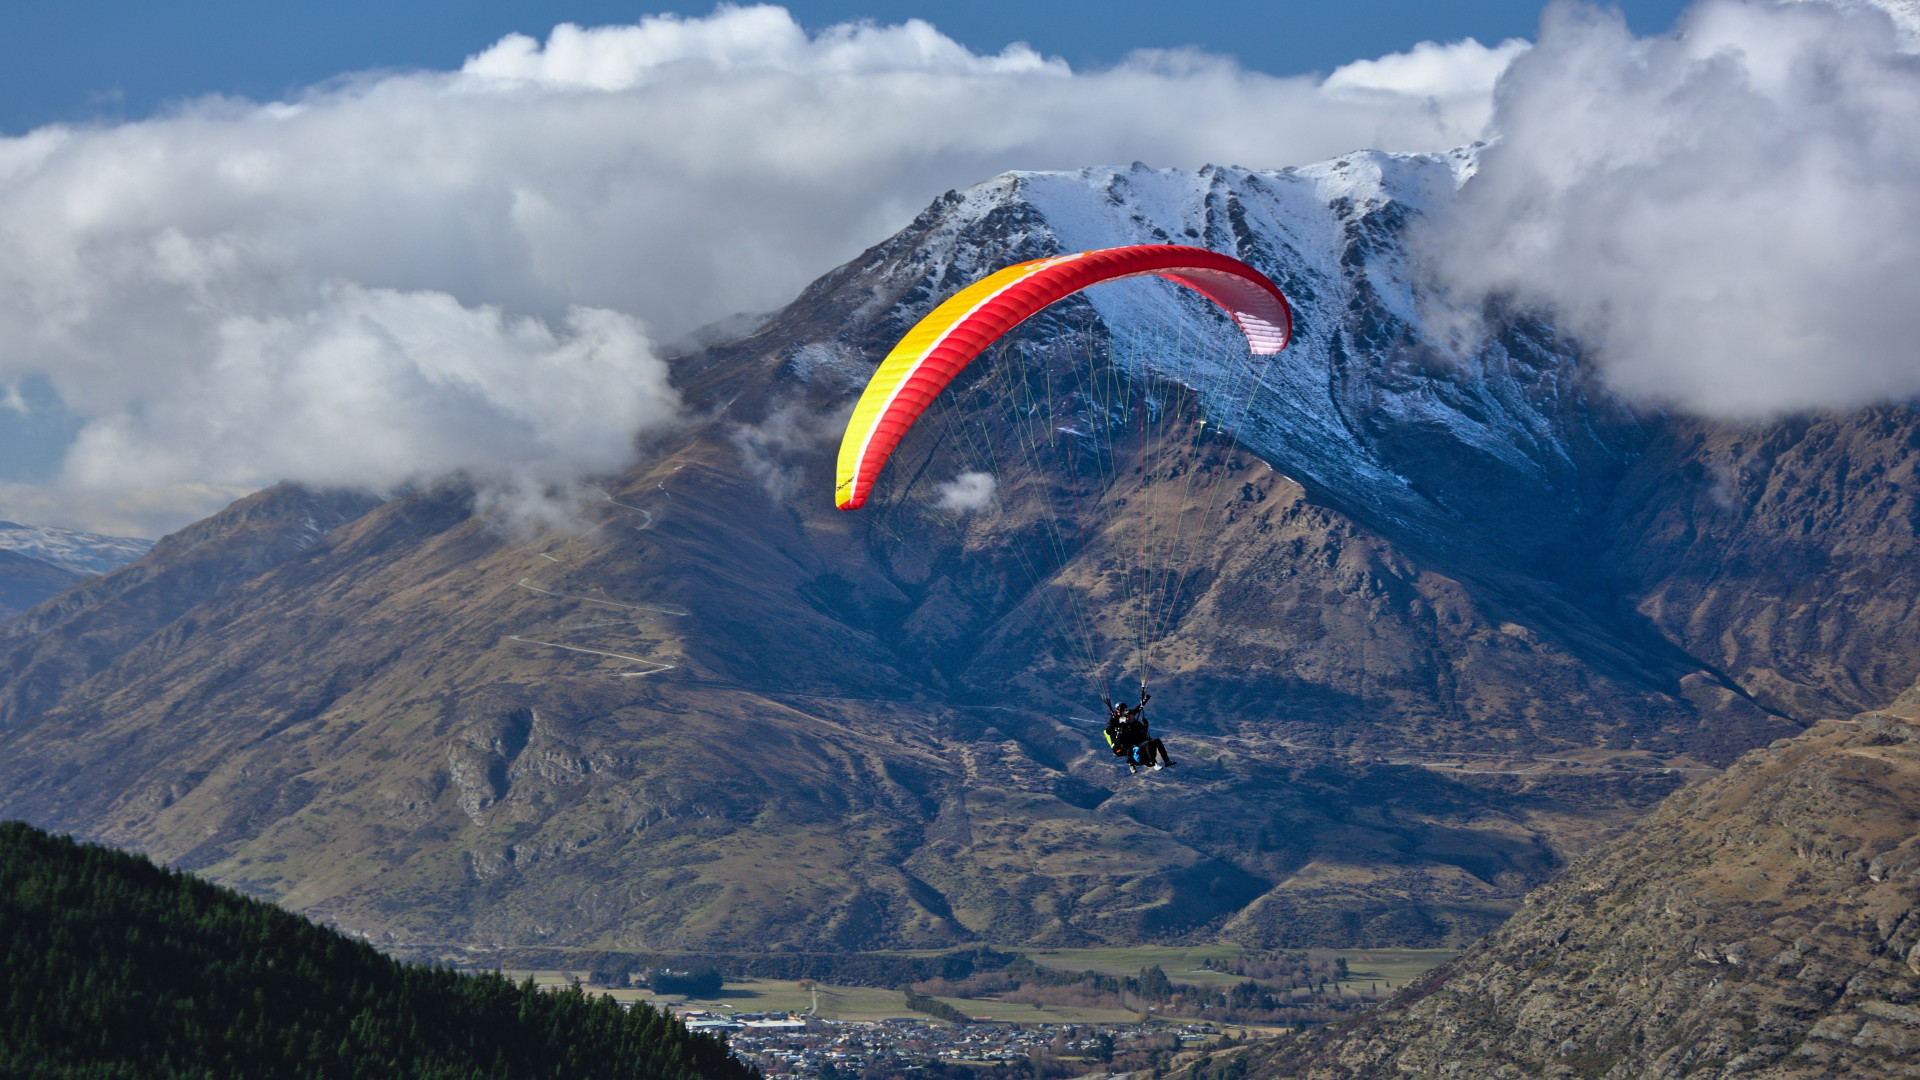 Paraglider up in the sky wallpaper 1920x1080